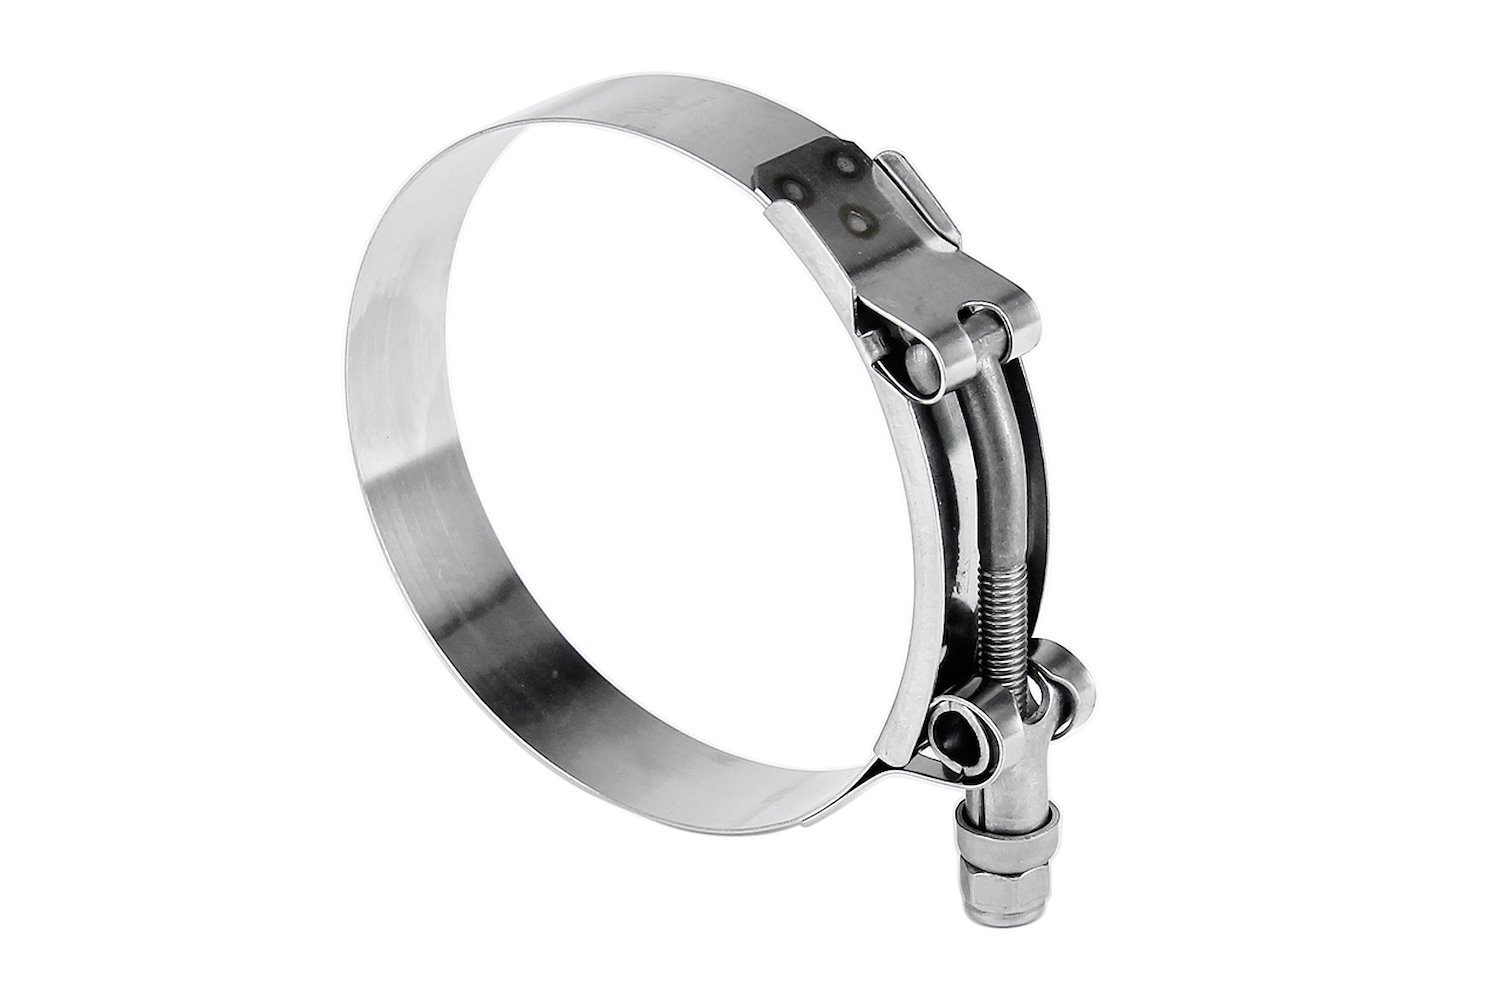 316-SSTC-67-75 100-Percent Marine Grade Stainless Steel T-Bolt Hose Clamp, Size #56, Range: 2.64 in.- 2.95 in.